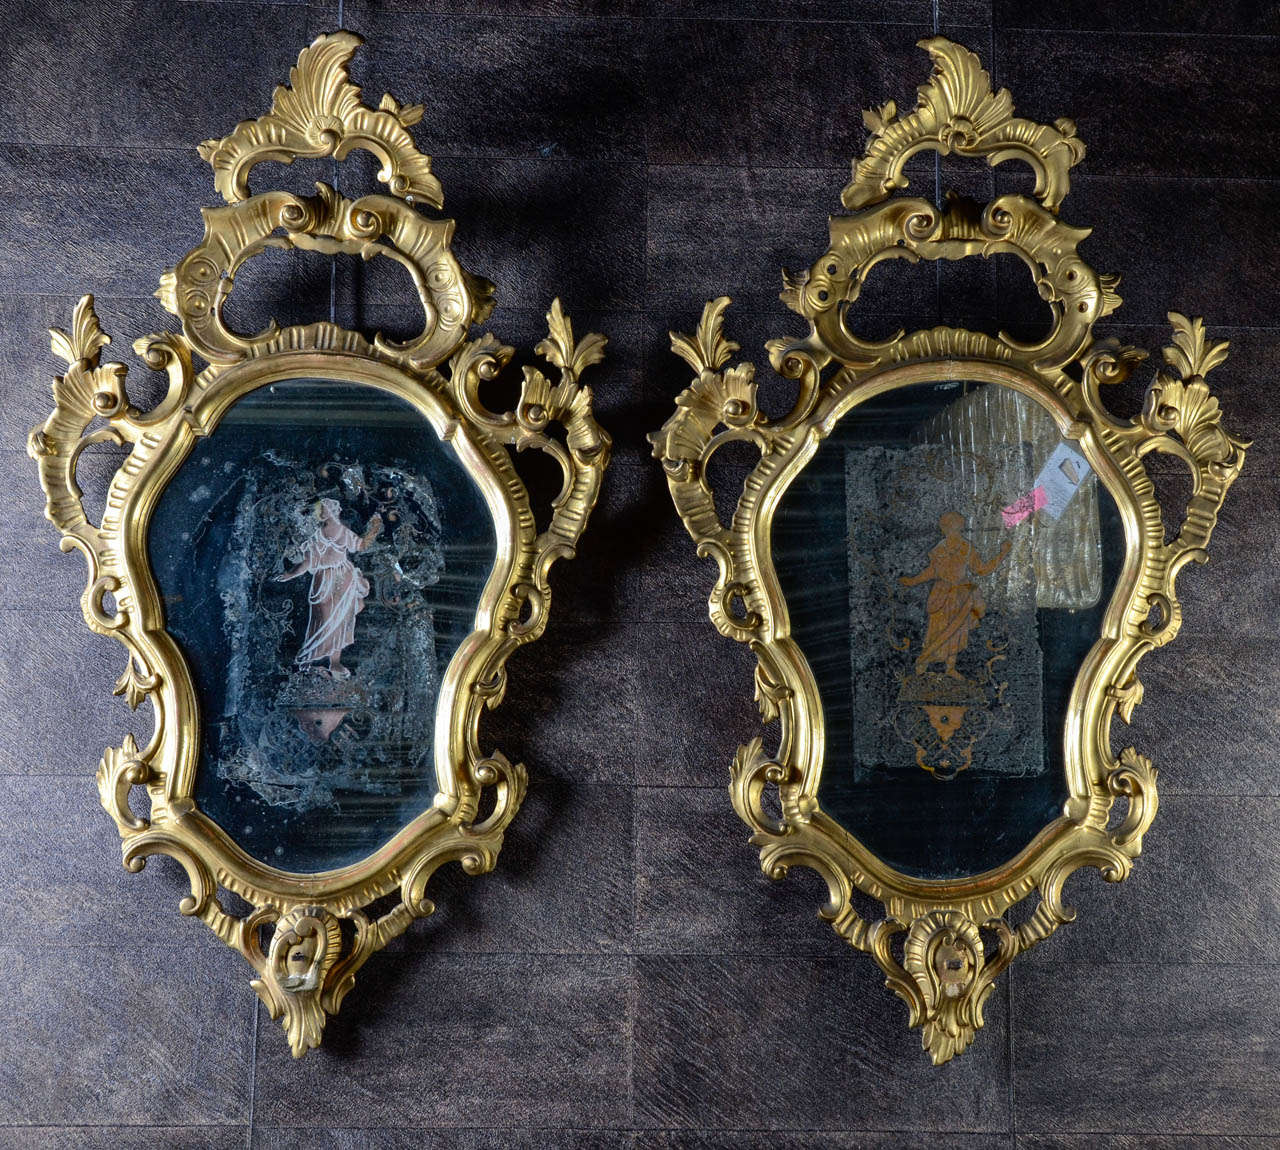 A rare pair of mid-18th century Venetian giltwood girandoles each surmounted by a stylized cresting supported by scrolls each in turn enriched with foliate carving. The mirror plates are original. The girandoles retain their original gilt tole